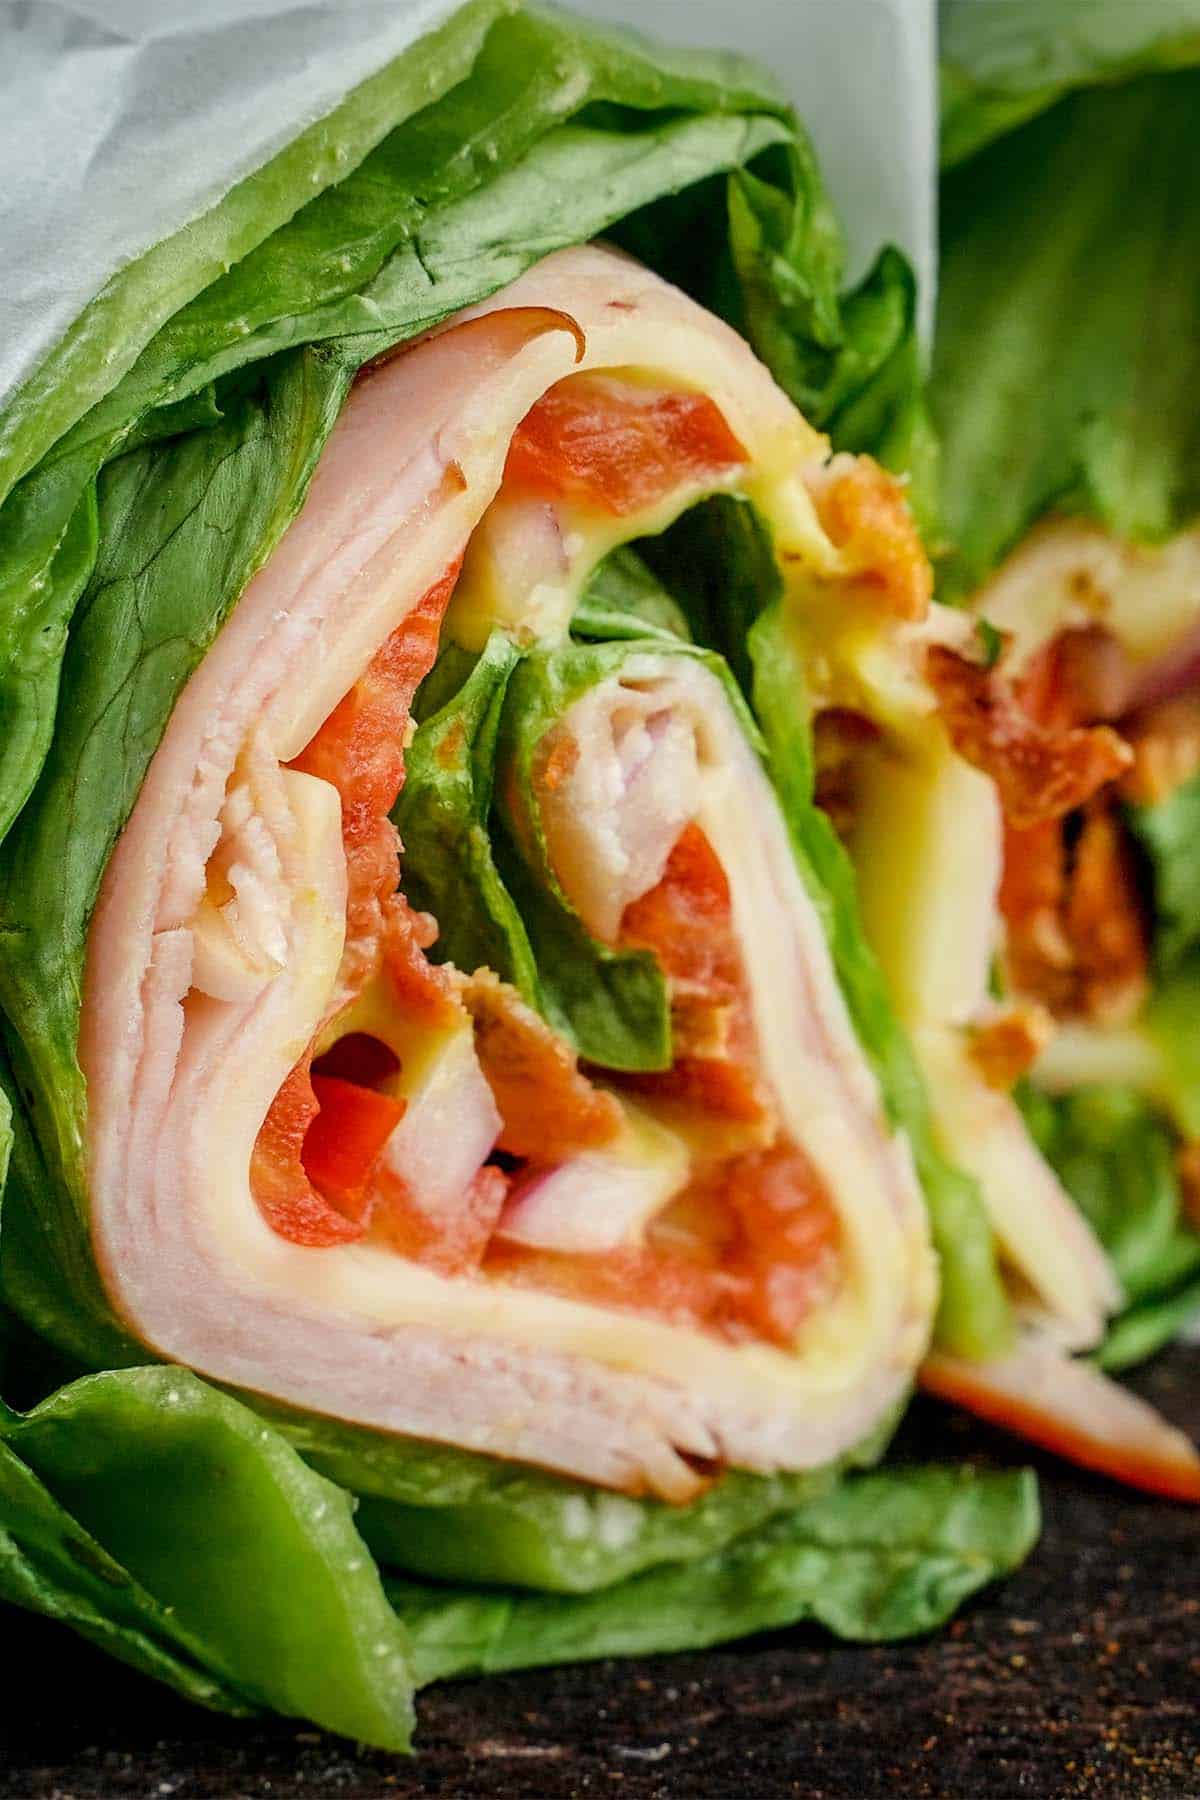 Close up of the meat in the Lettuce Wrap Sandwich.